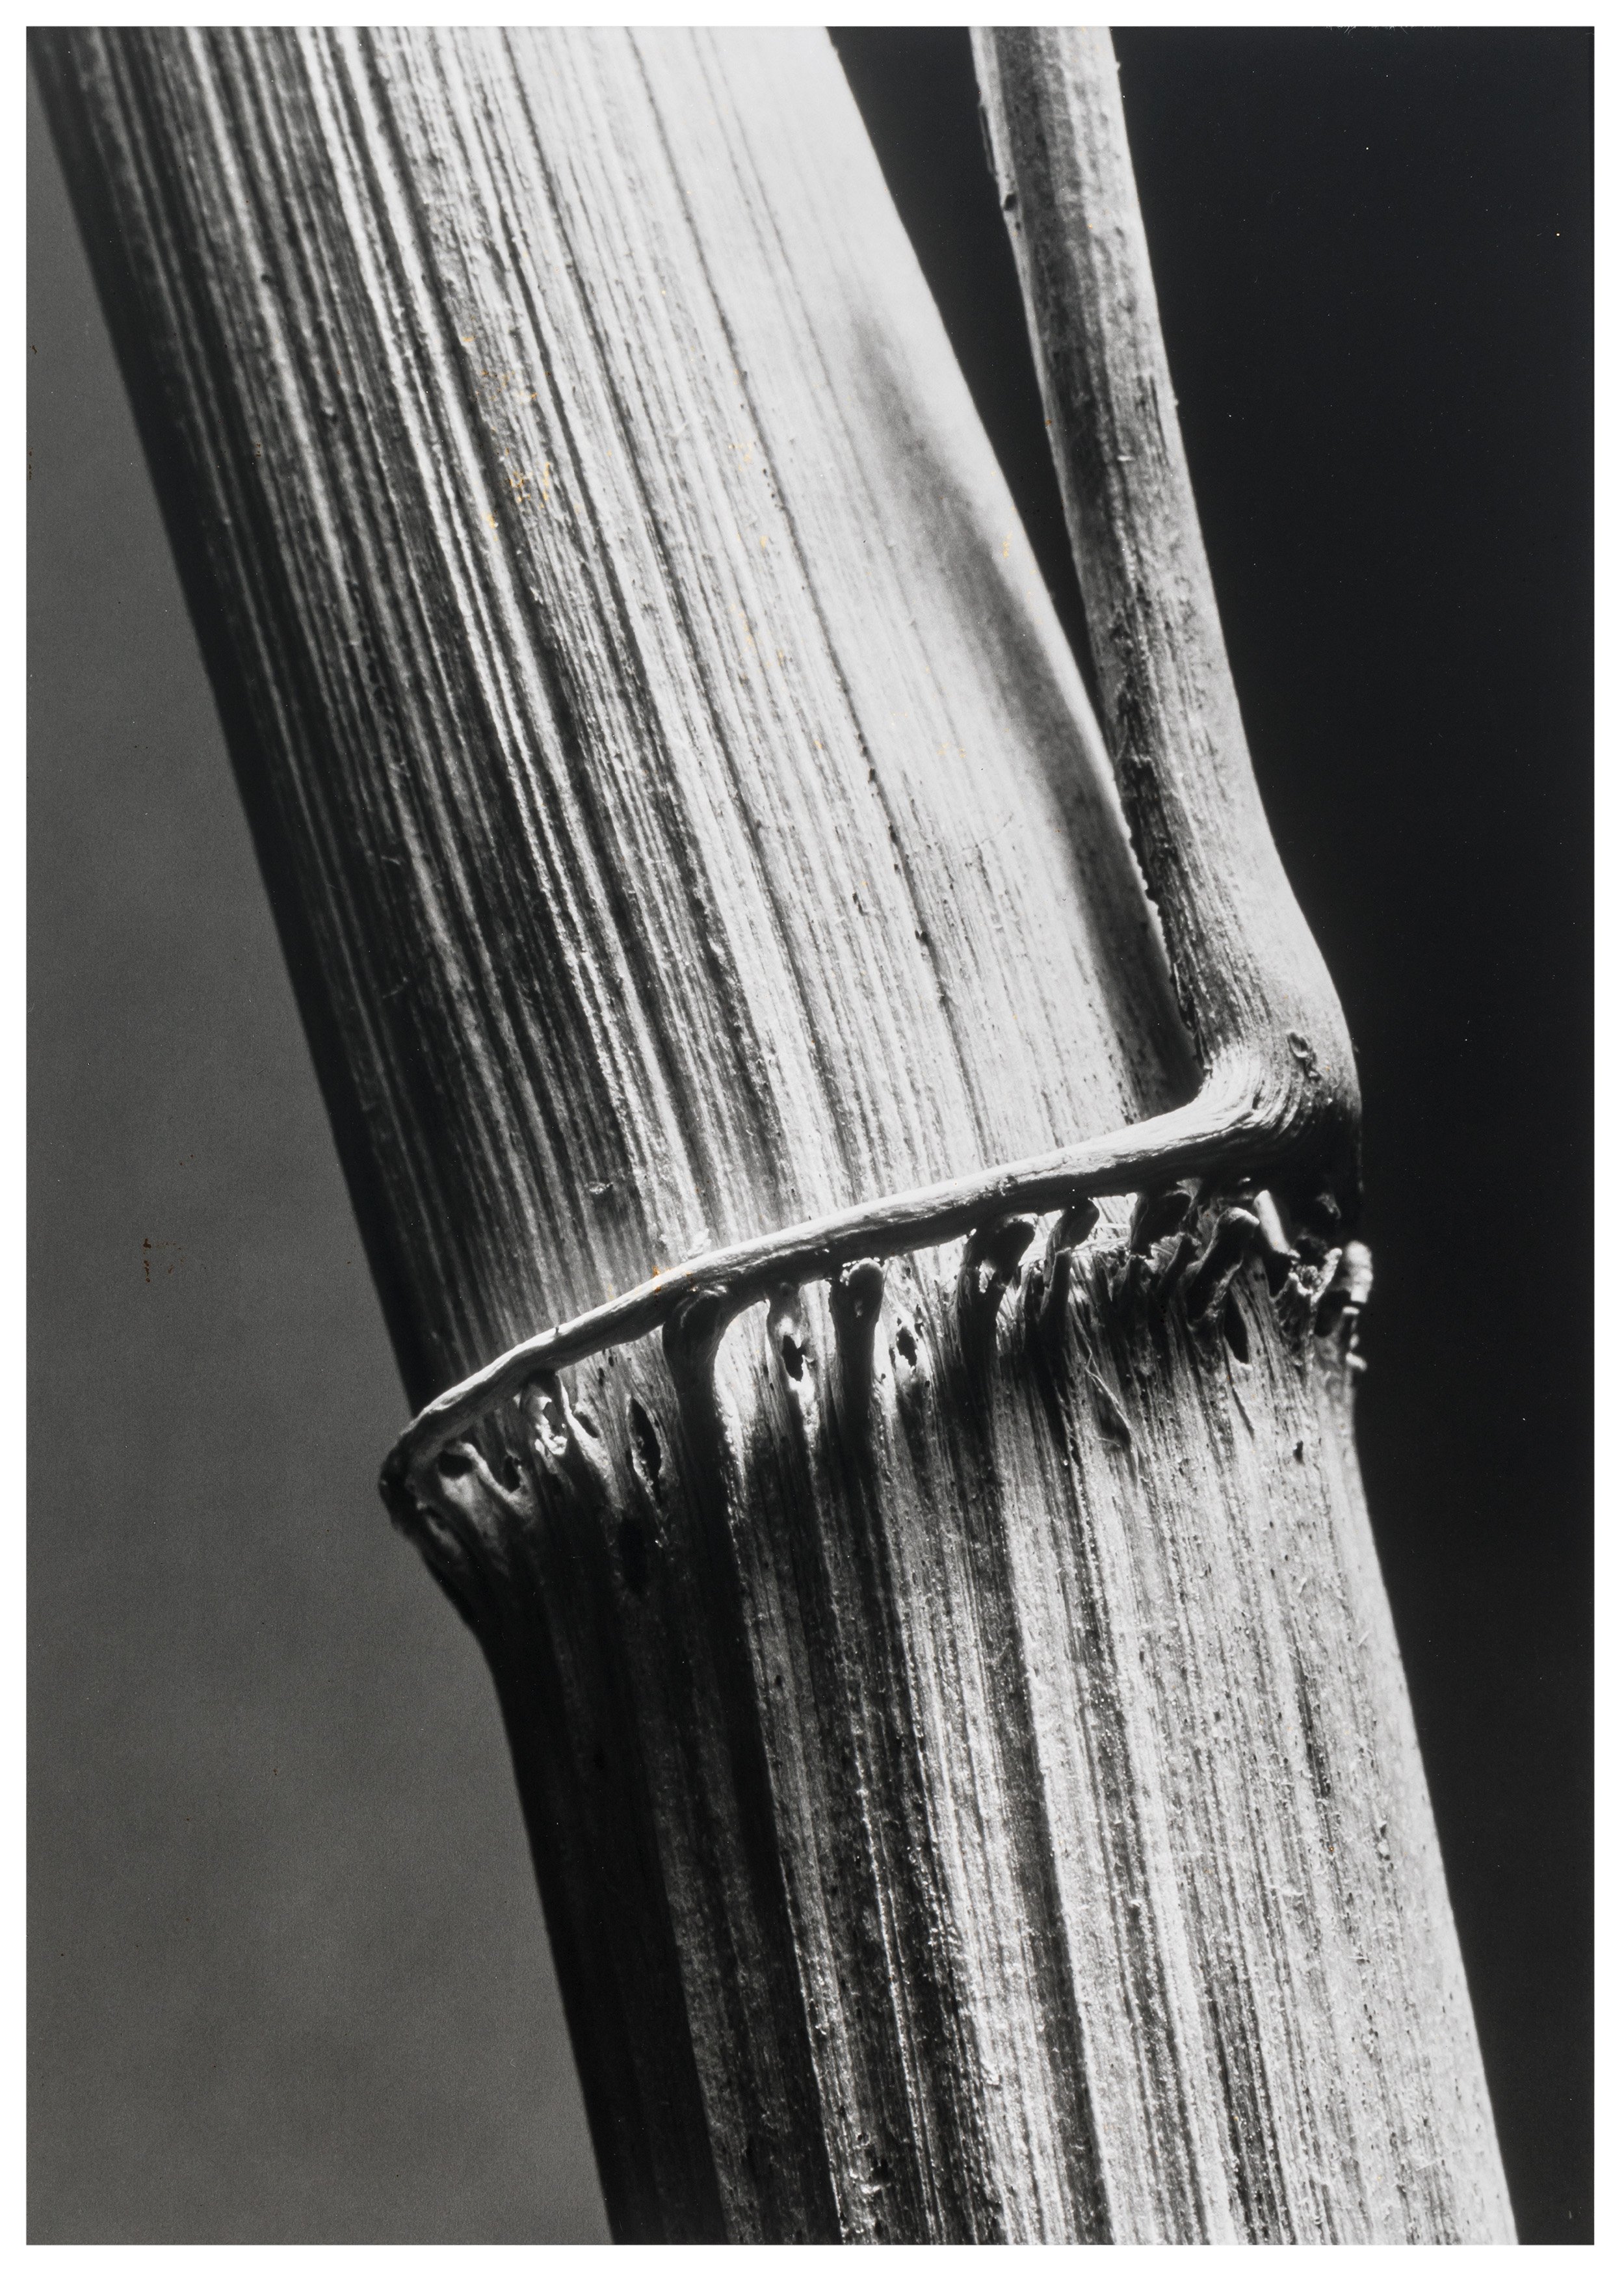 Andreas Feininger: Reed Stalk (Zeppelin Museum CC BY-ND)